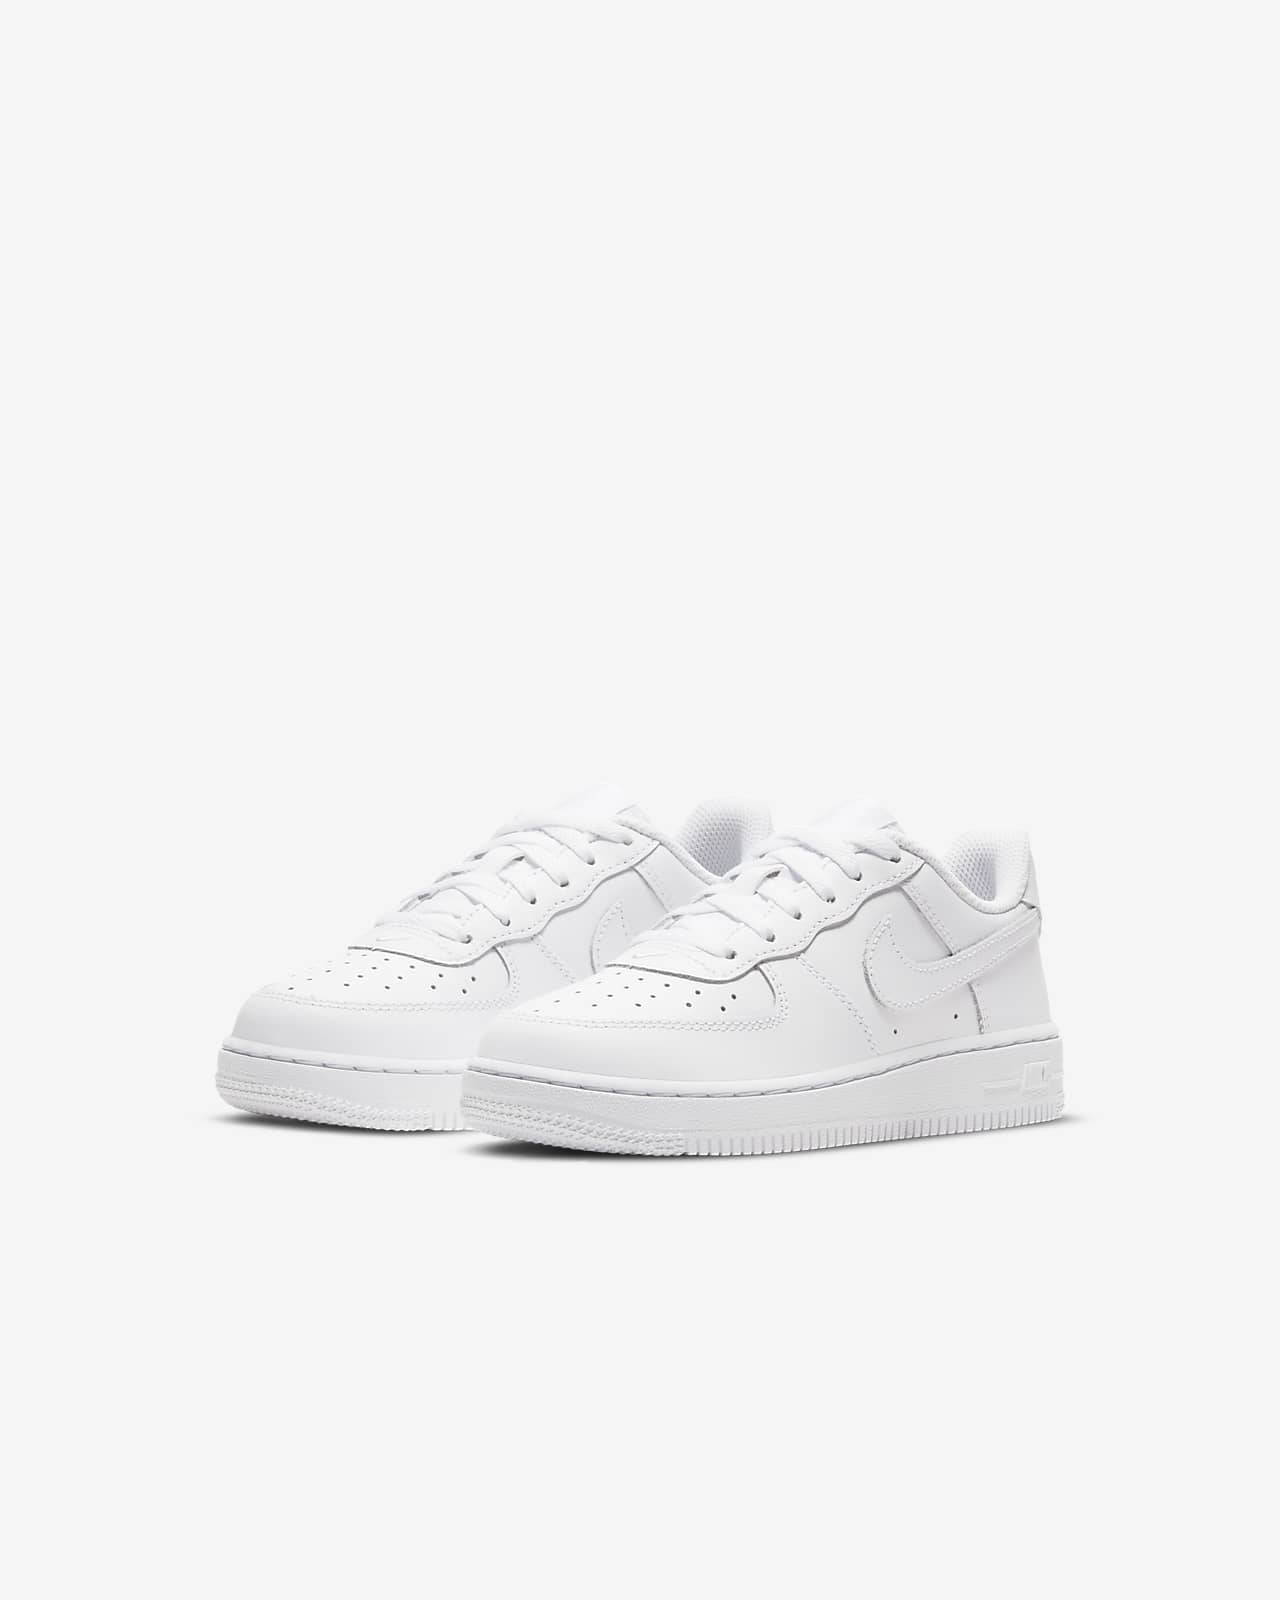 youth size air force ones